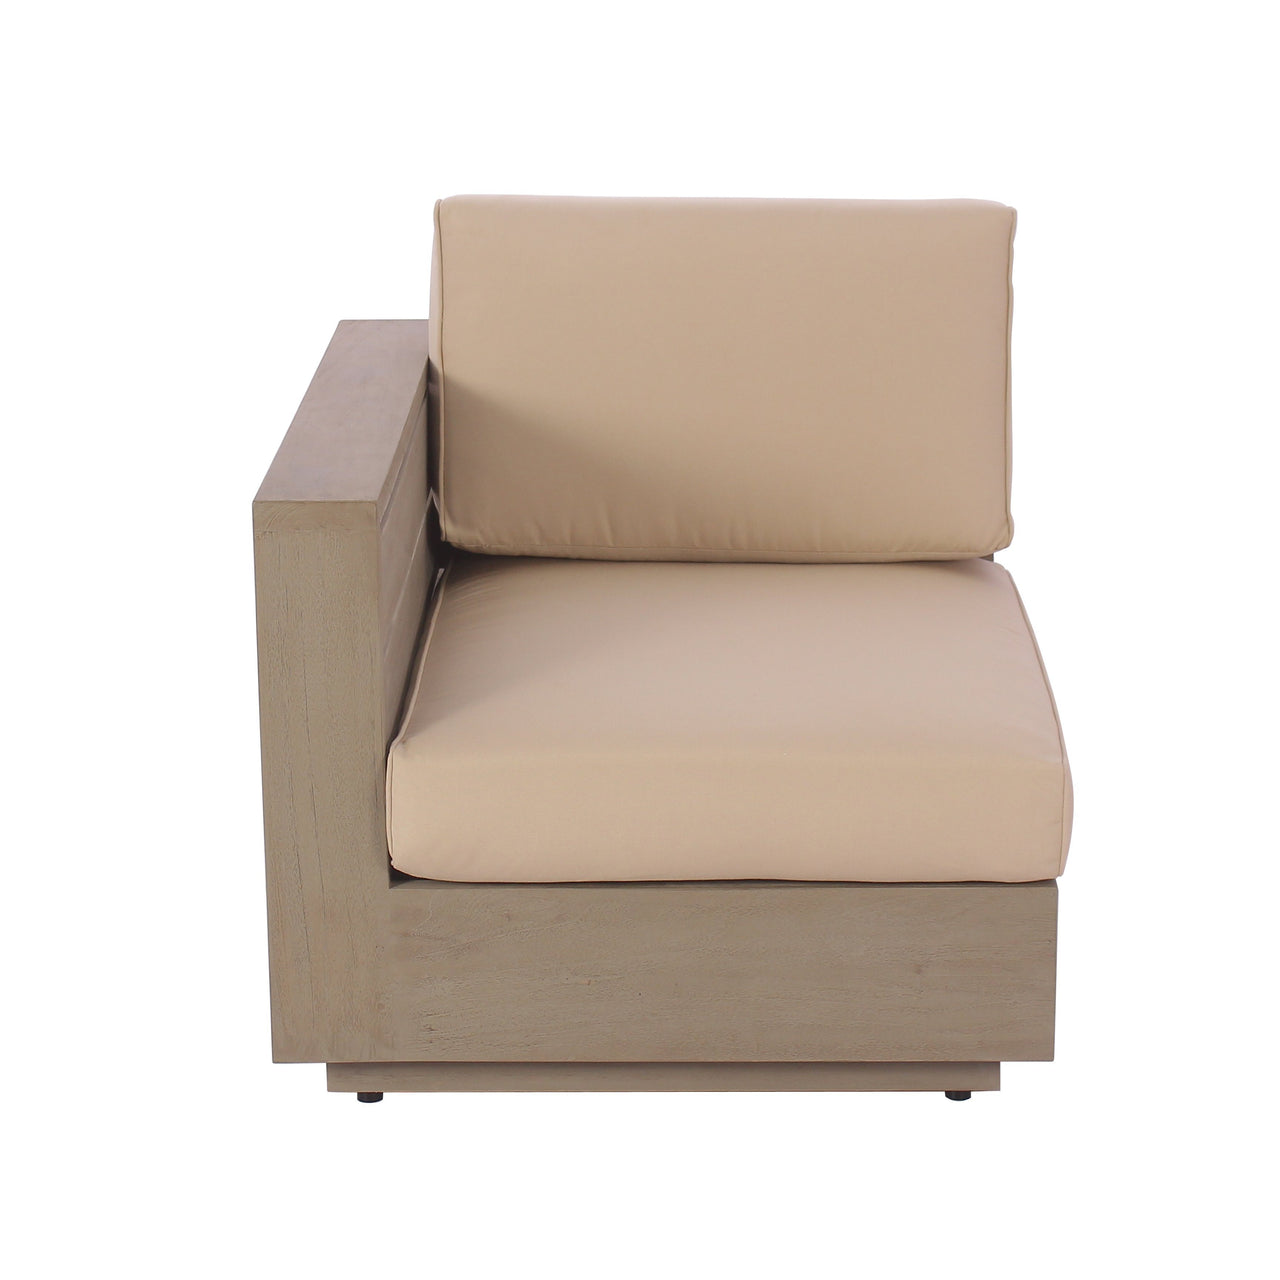 Banner Elk Right Seat Outdoor Furniture Tuscan 